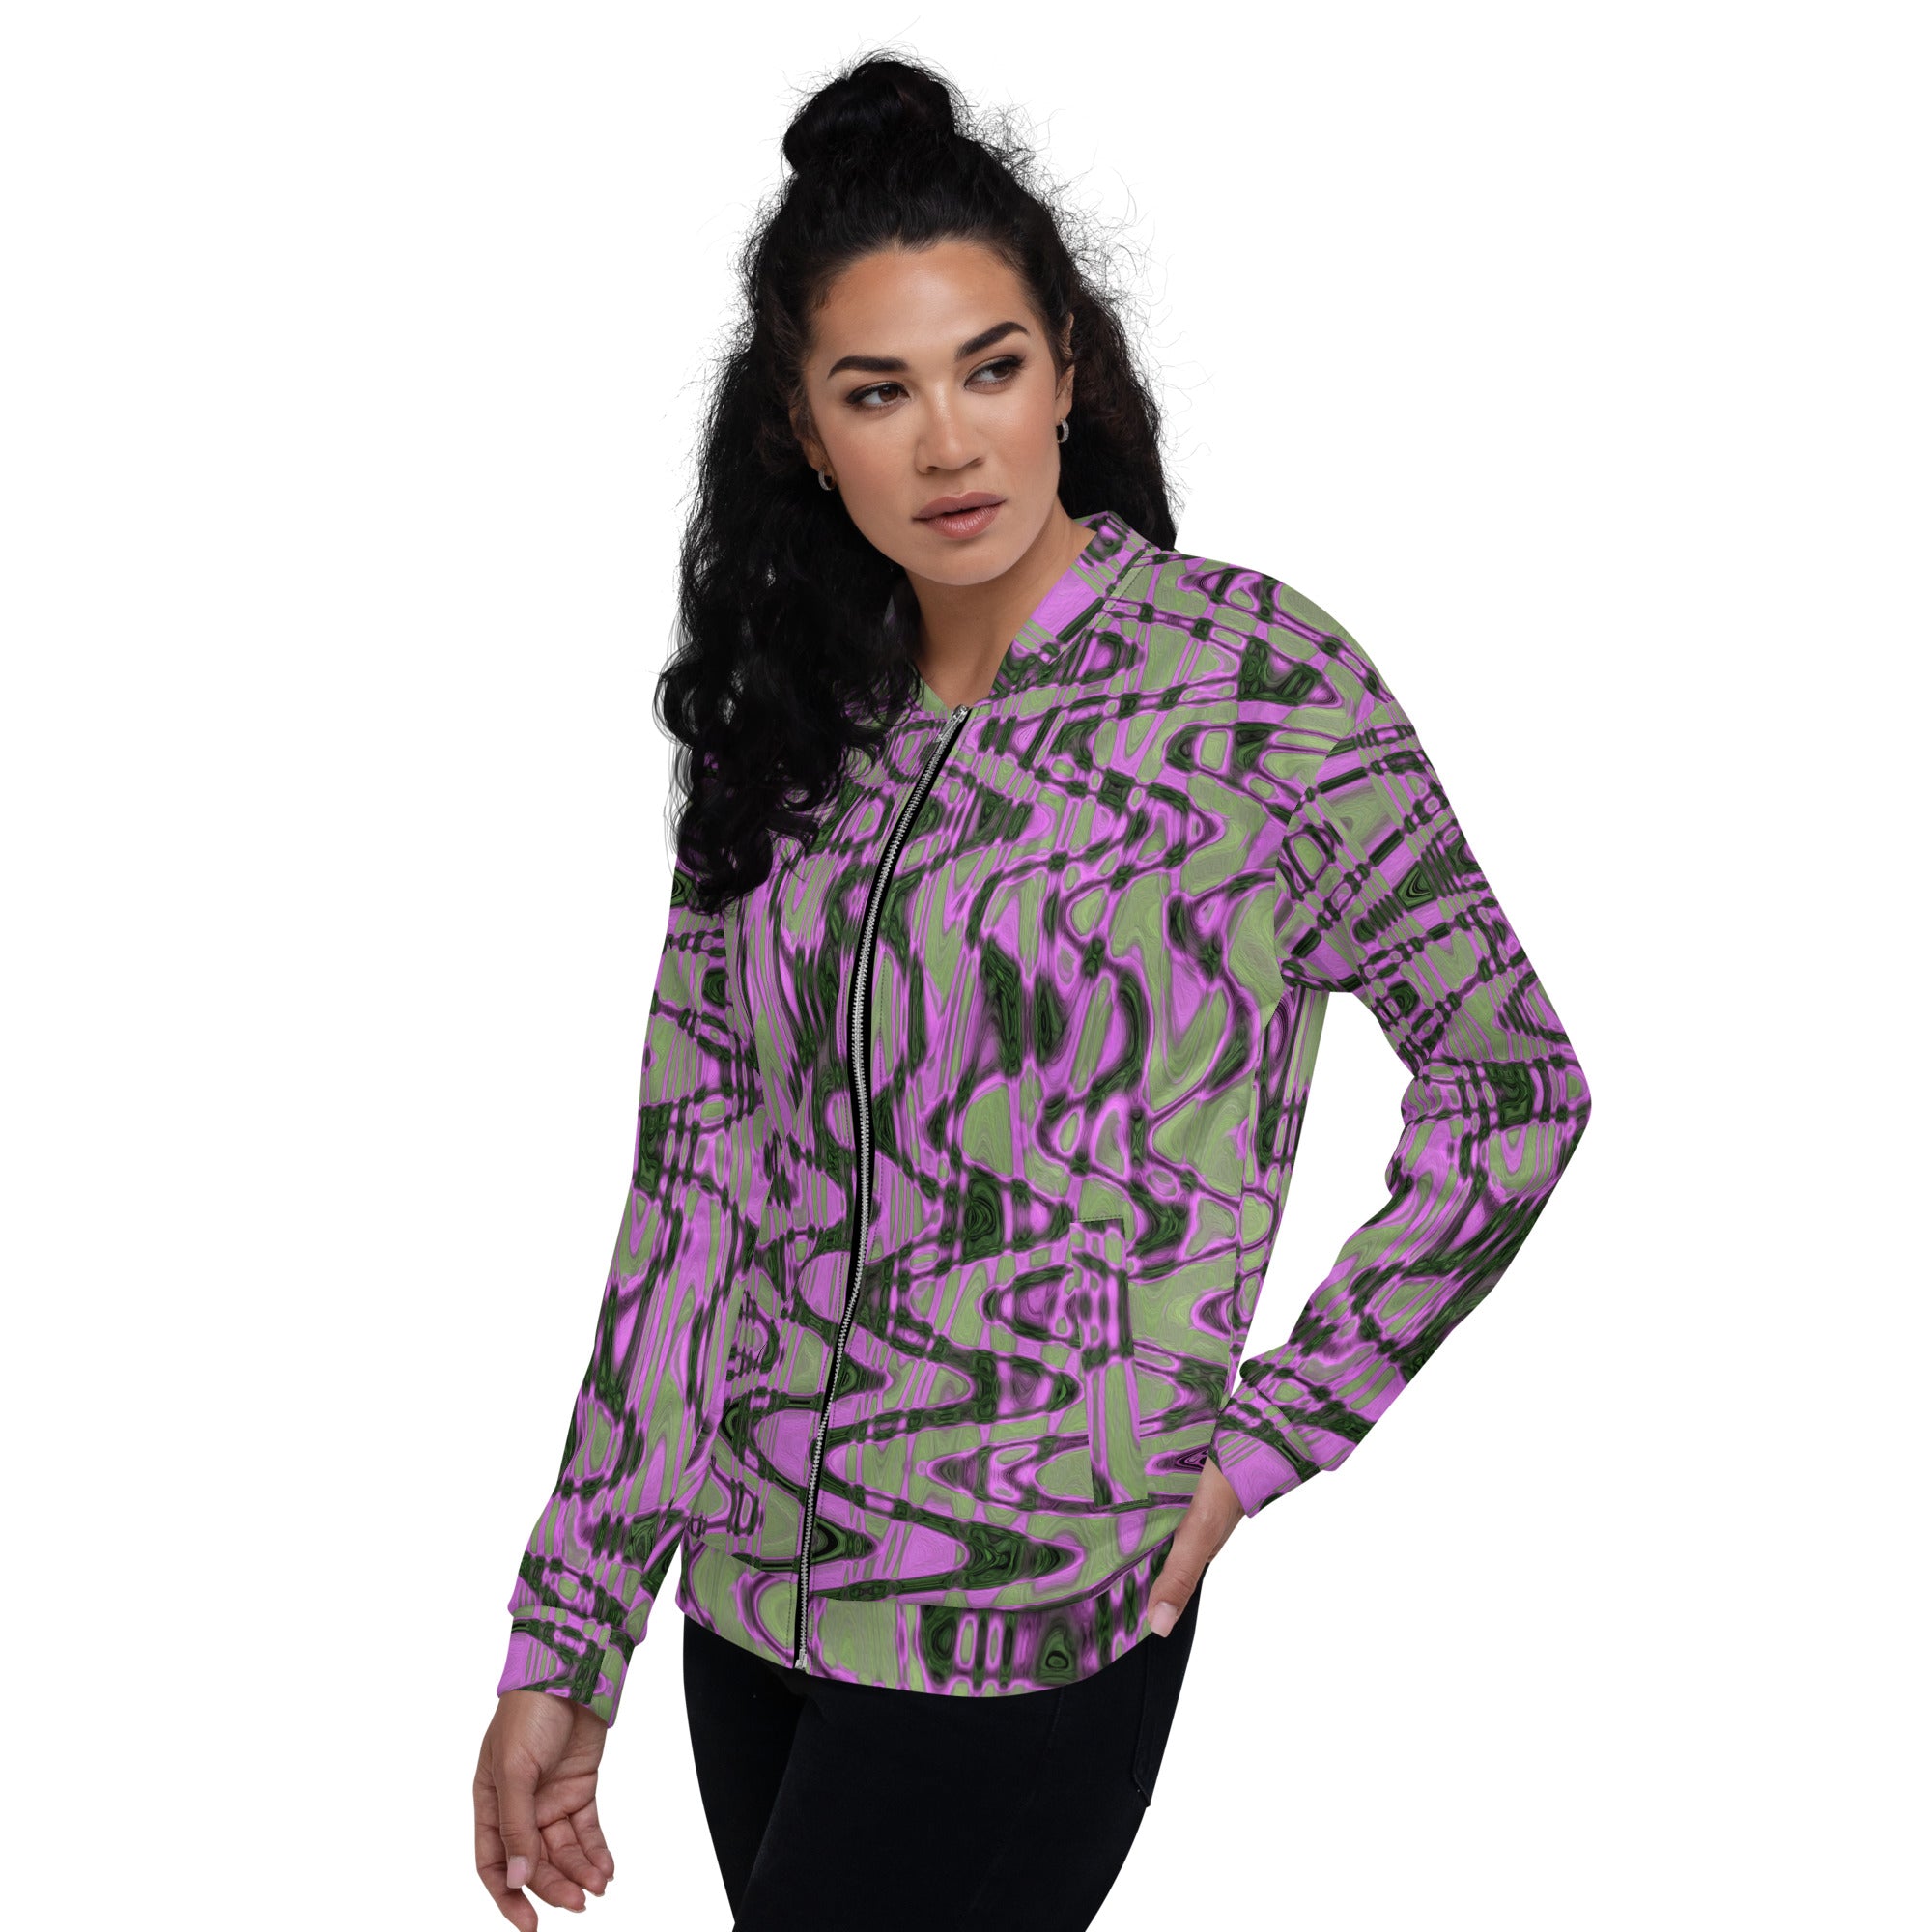 Unisex Bomber Jacket | Cool Green and Pink Abstract Tie Dye Retro Waves